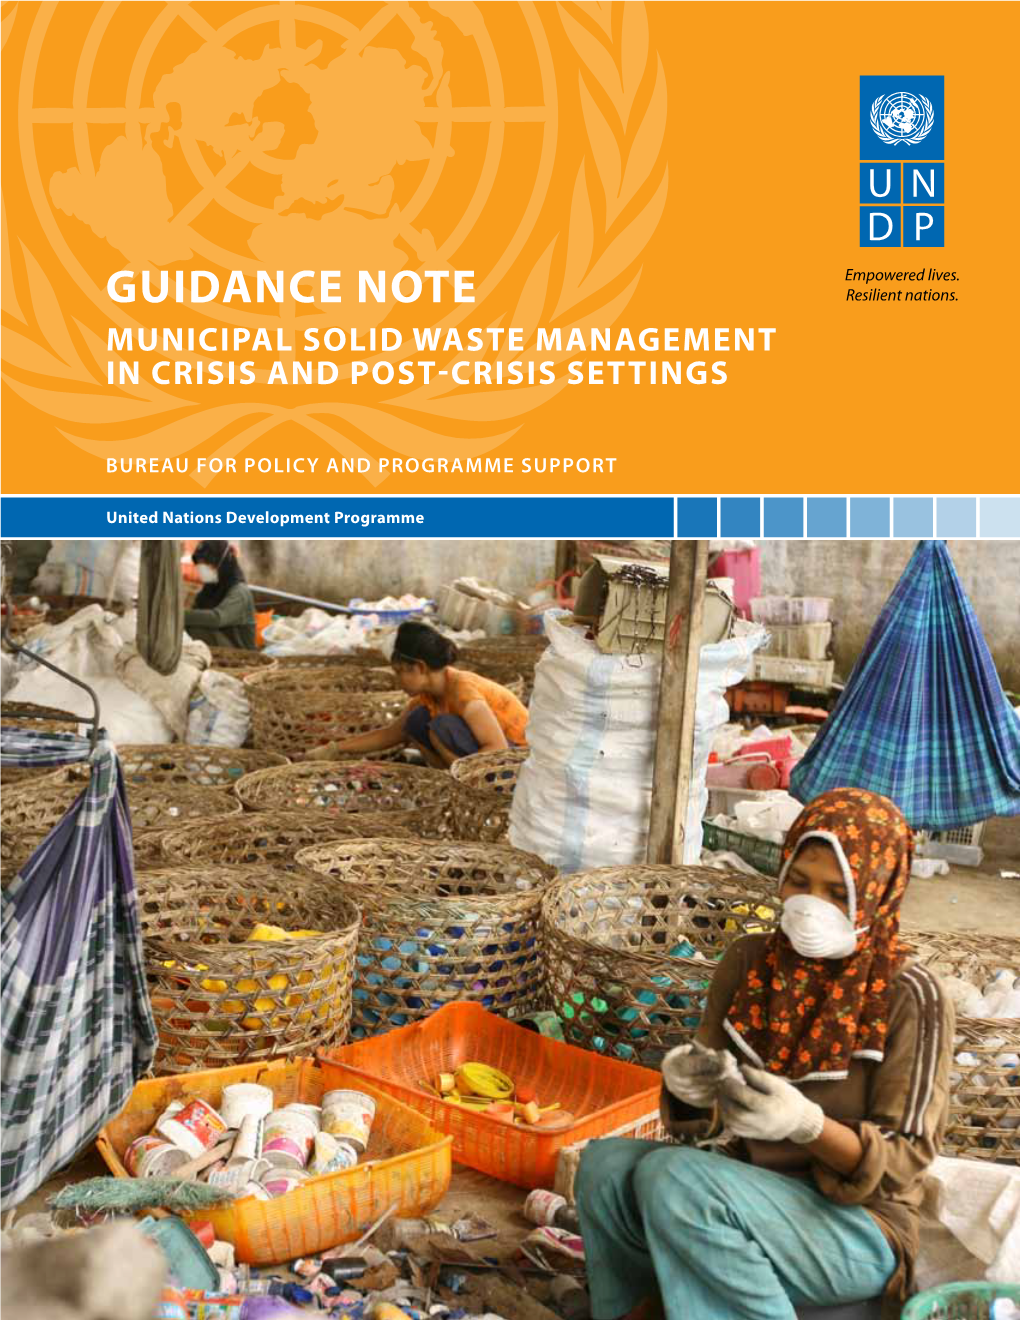 UNDP, Guidance Note on Municipal Solid Waste Management